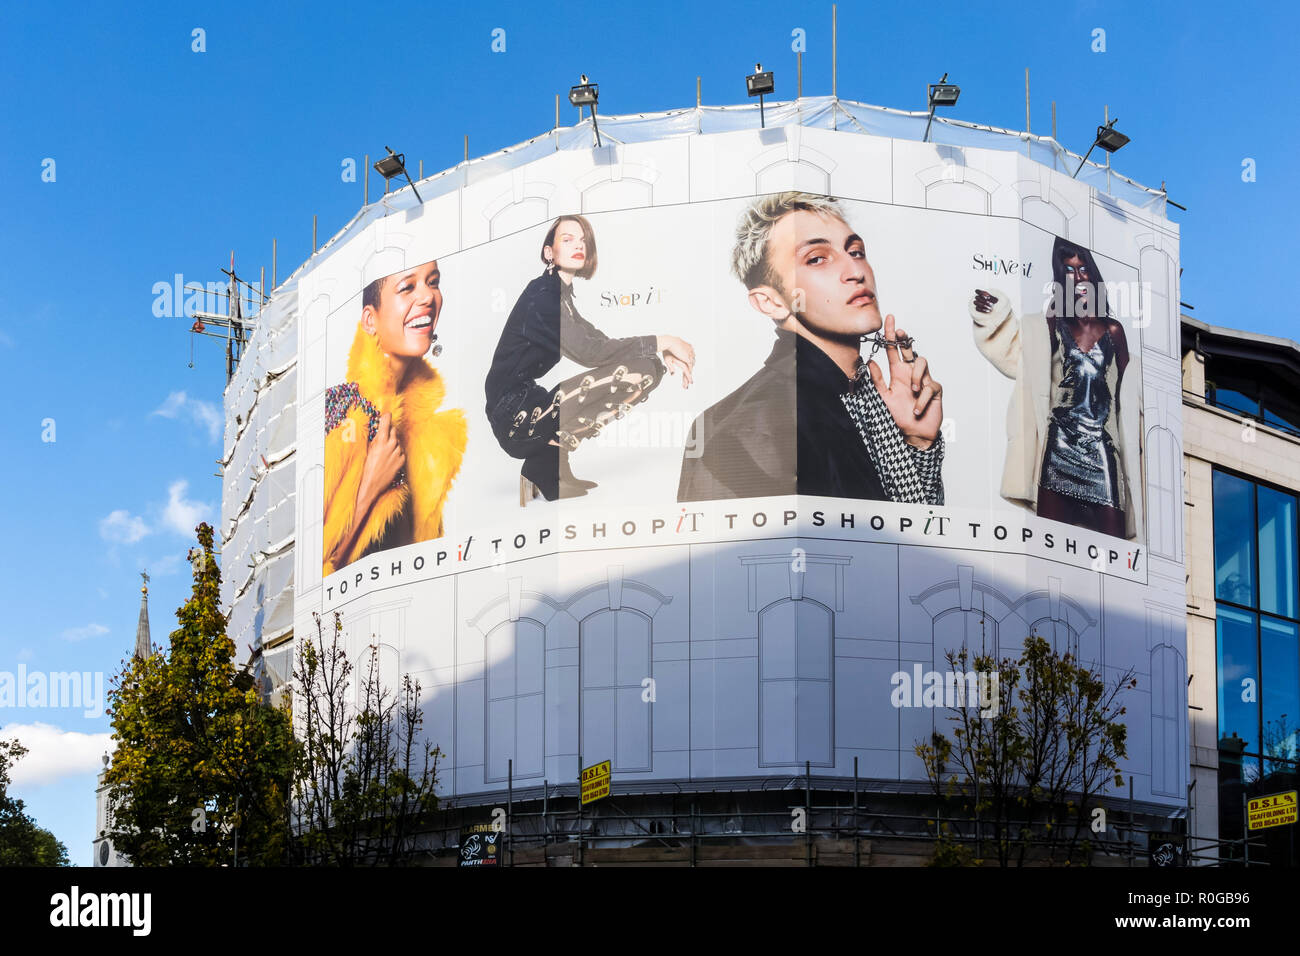 Large Topshop advertisement on building in Clerkenwell, London Stock Photo  - Alamy